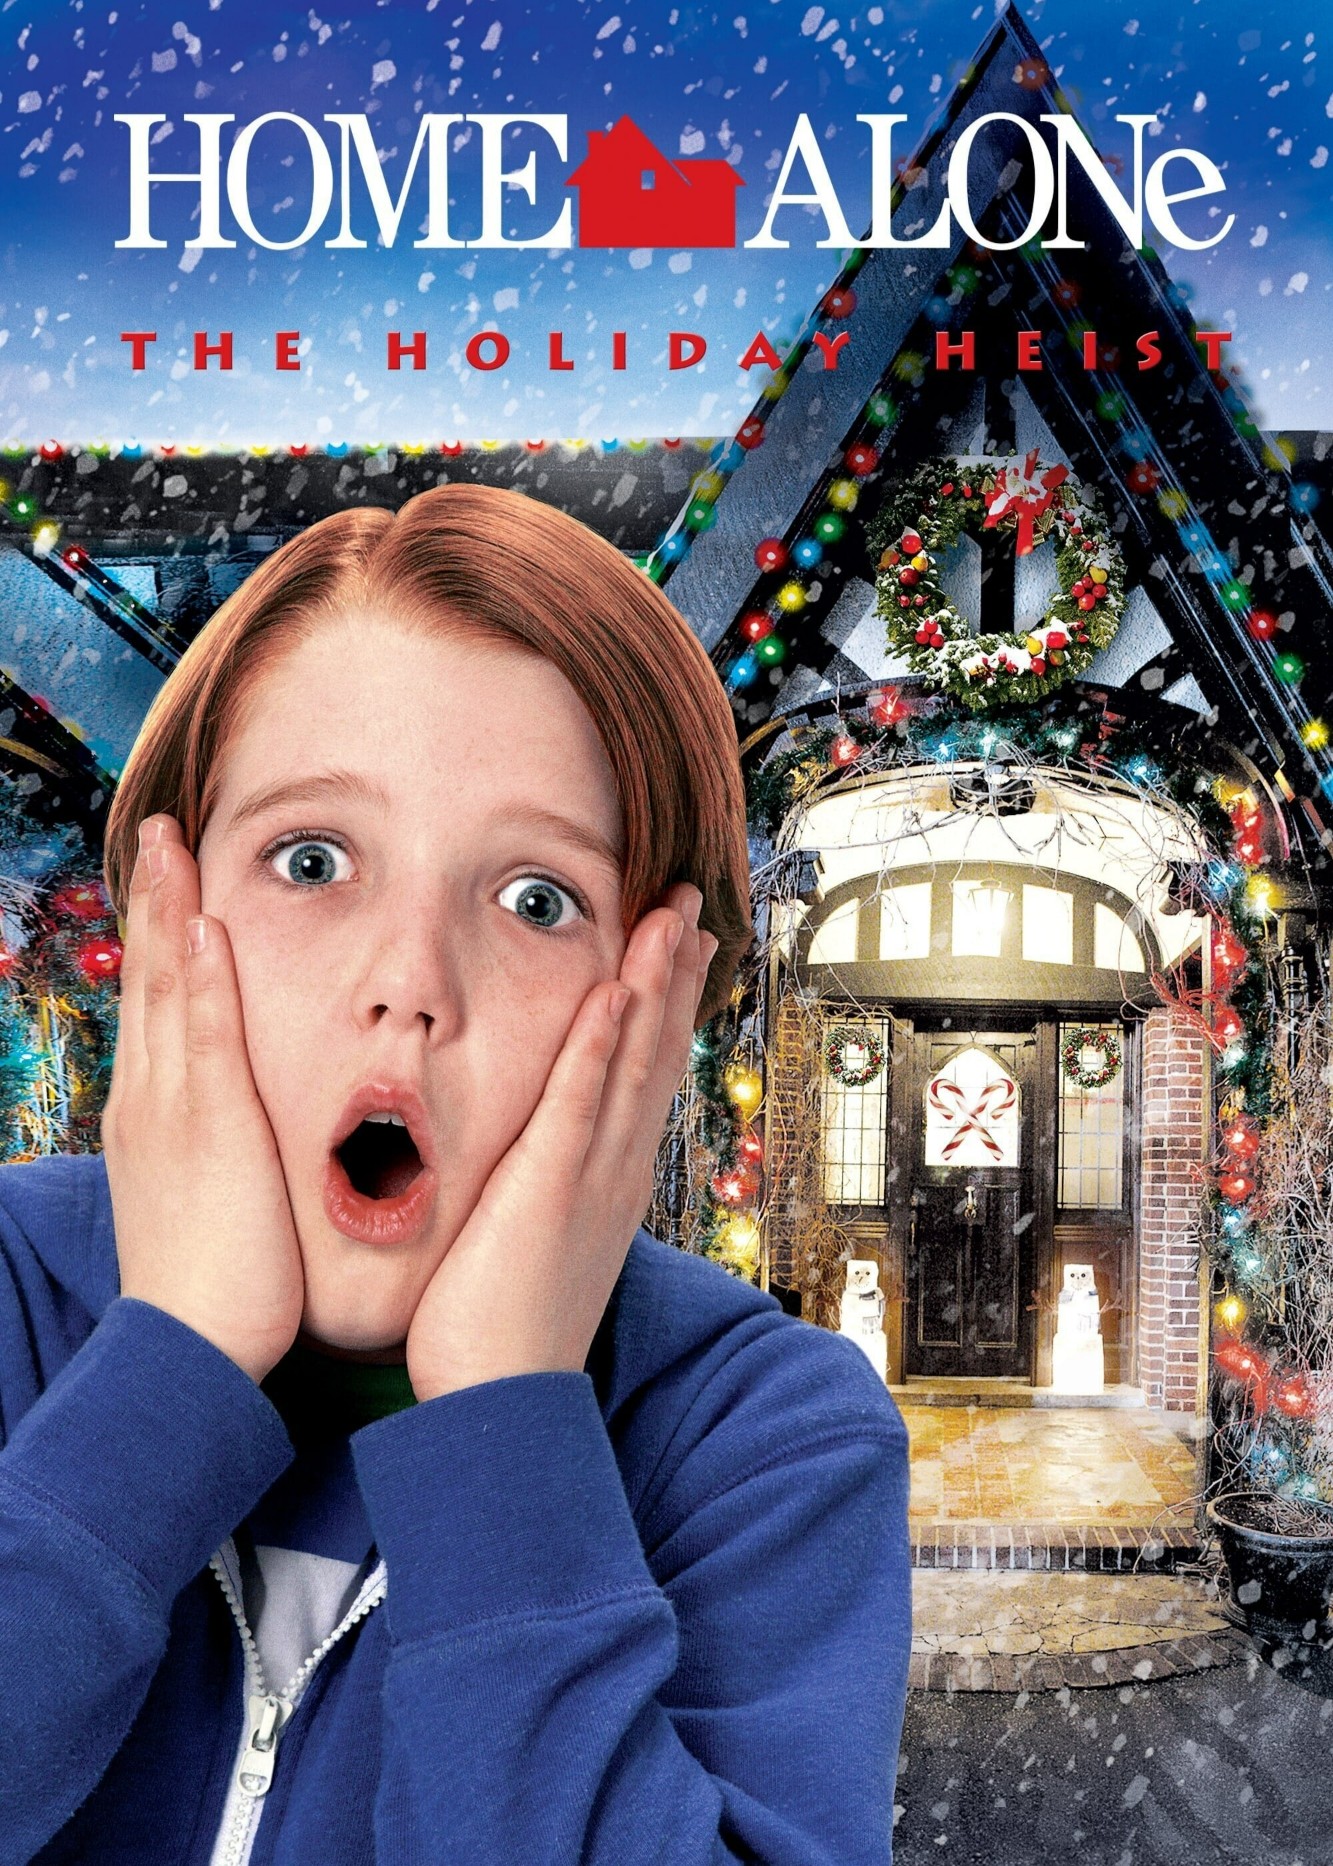 Home Alone: The Holiday Heist 2012